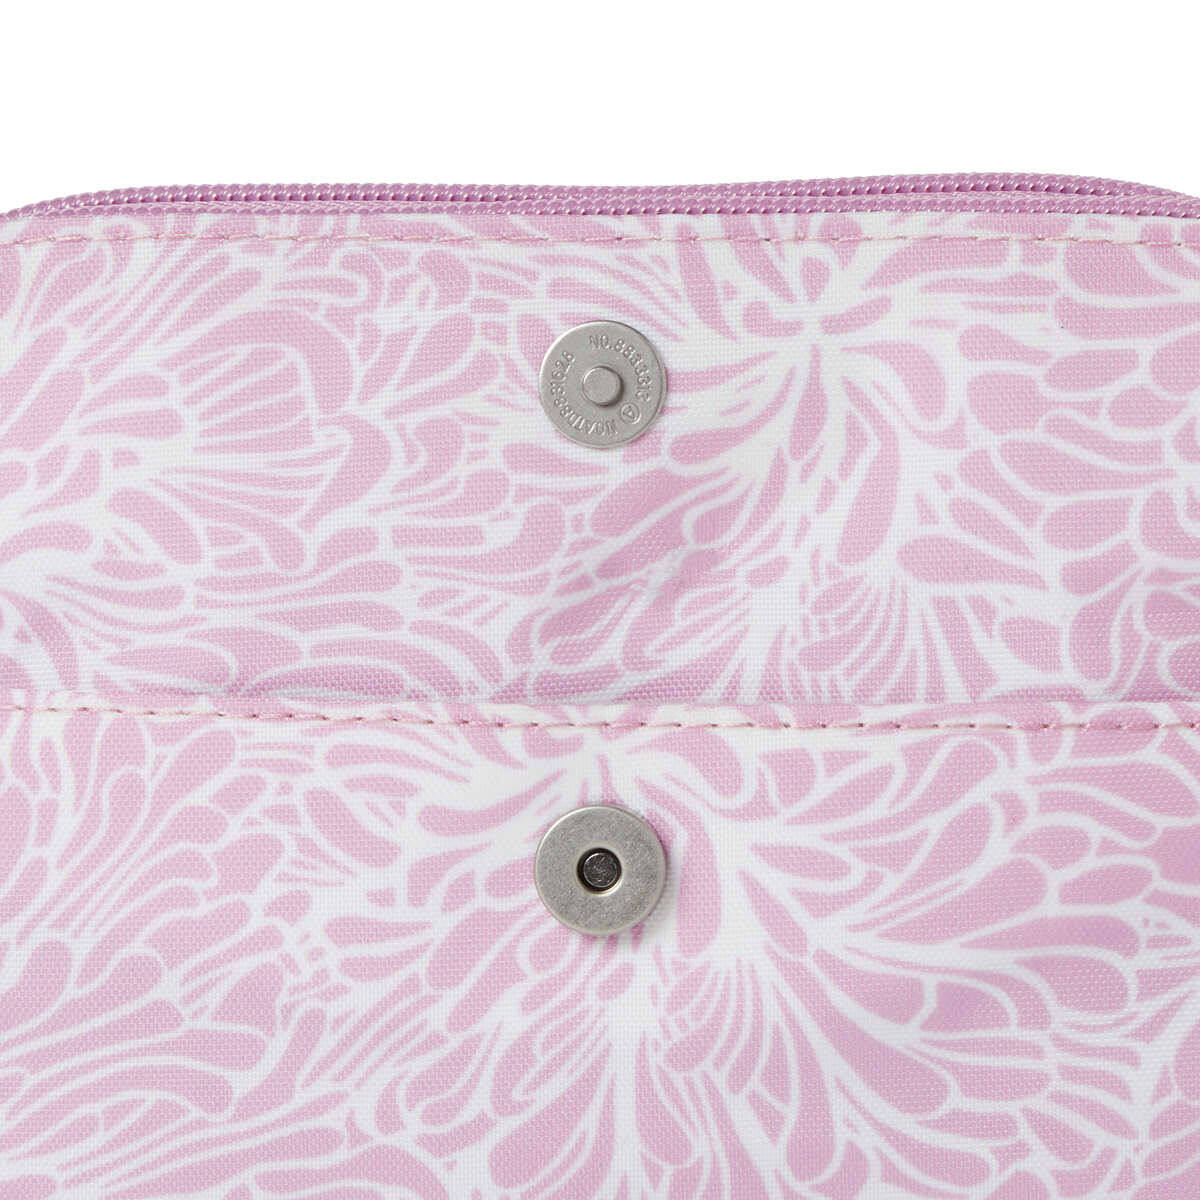 close up view of magnet snaps of baggallini modern everywhere mini bag in pink blossom color